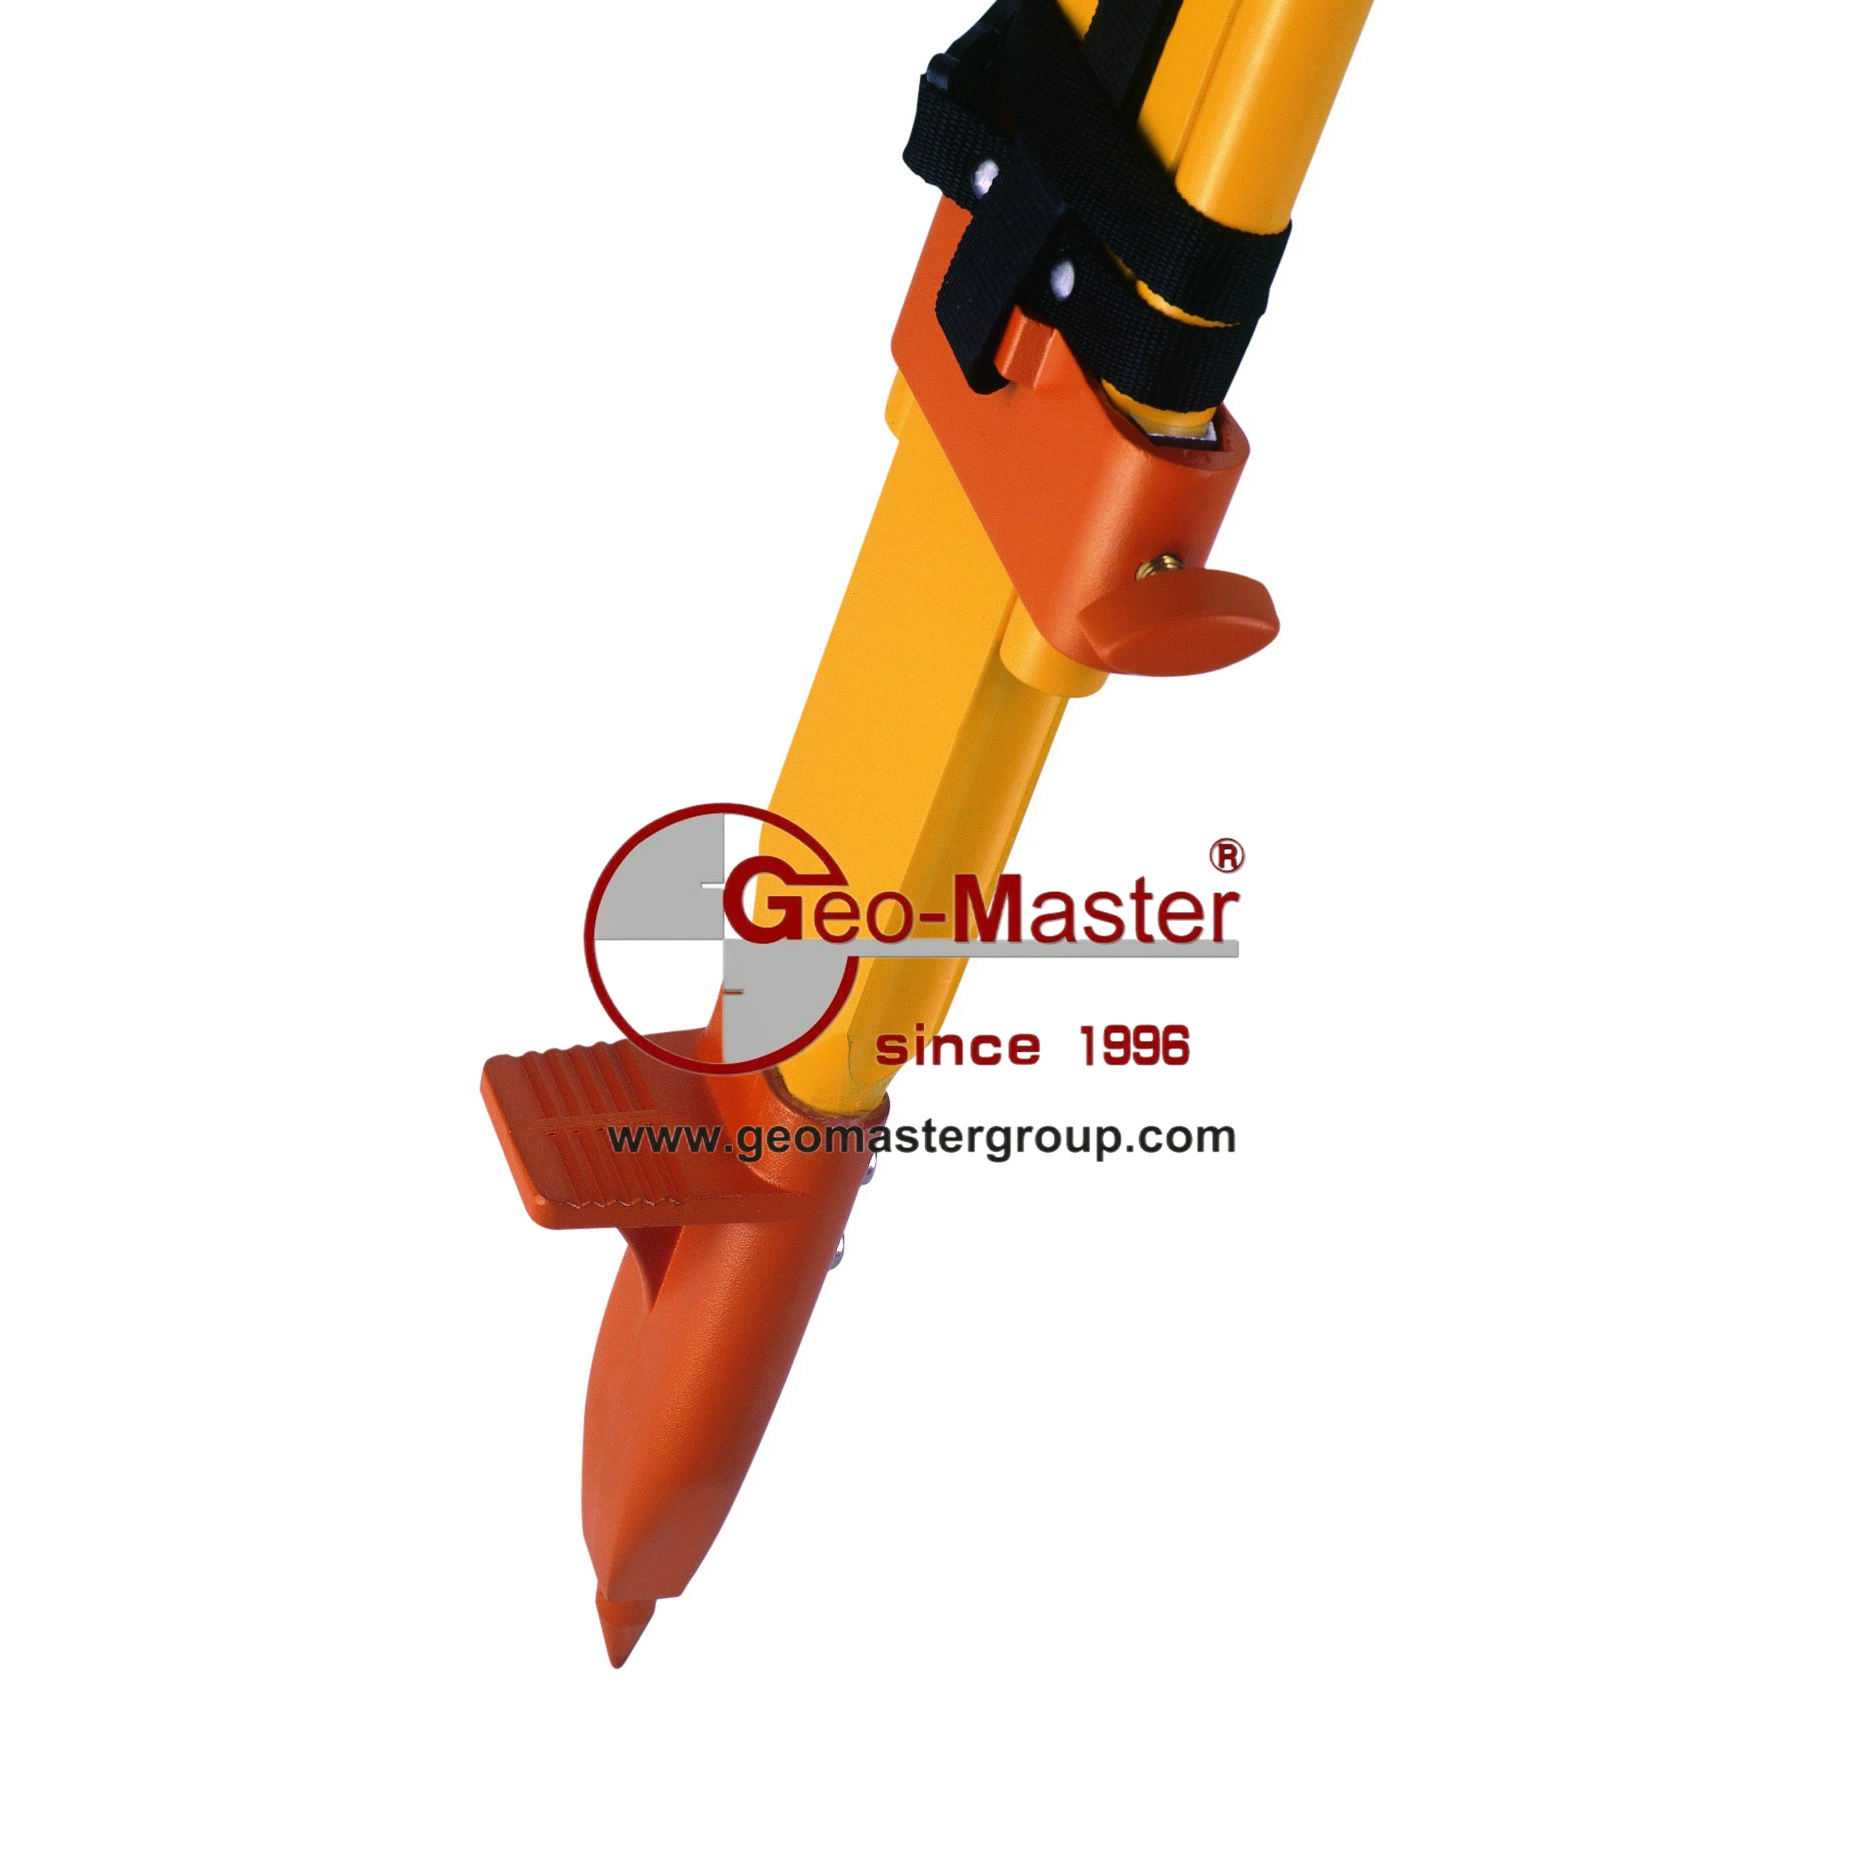 Geomaster Heavy-Duty Surveying Tripod for Surveying Instruments, Mutistations, Robotic Stations